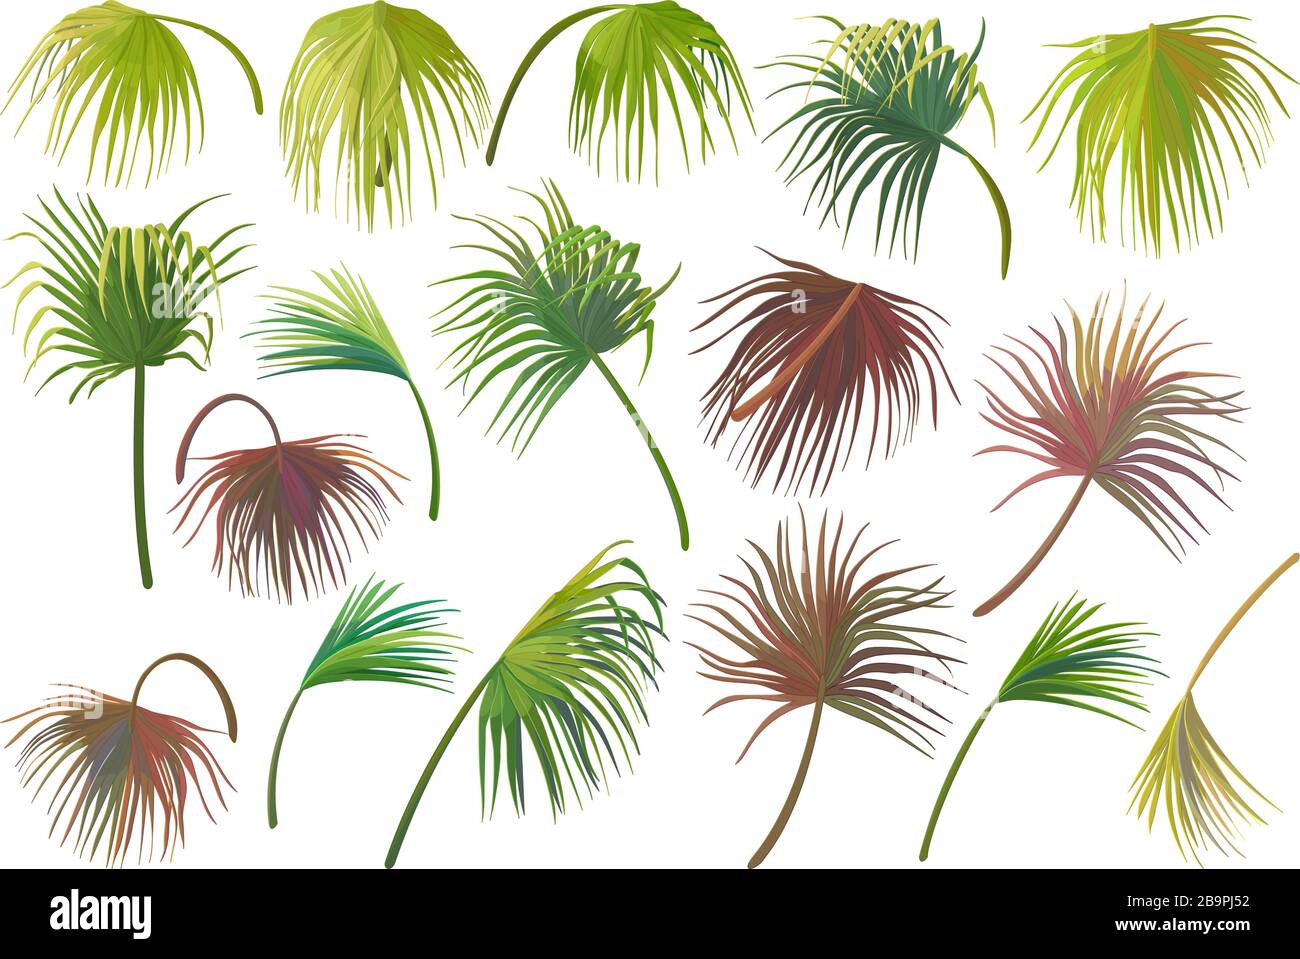 vector handdrawn plant clipart Fan palm tree leaves Stock Vector